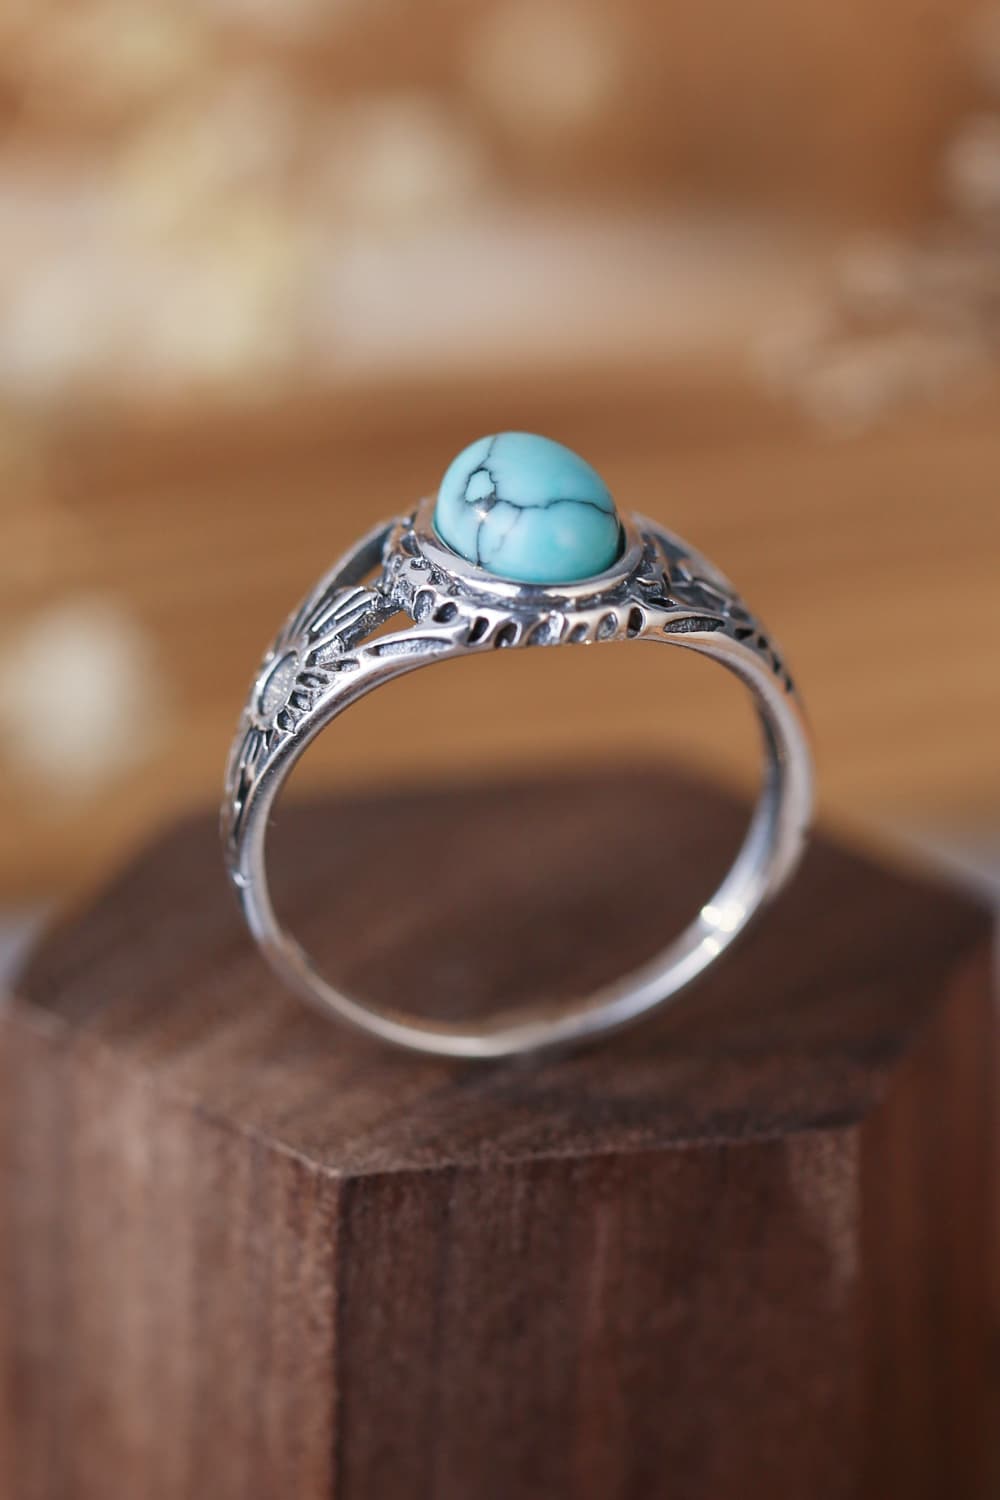 Dim Gray Turquoise 925 Sterling Silver Ring Sentient Beauty Fashions rings